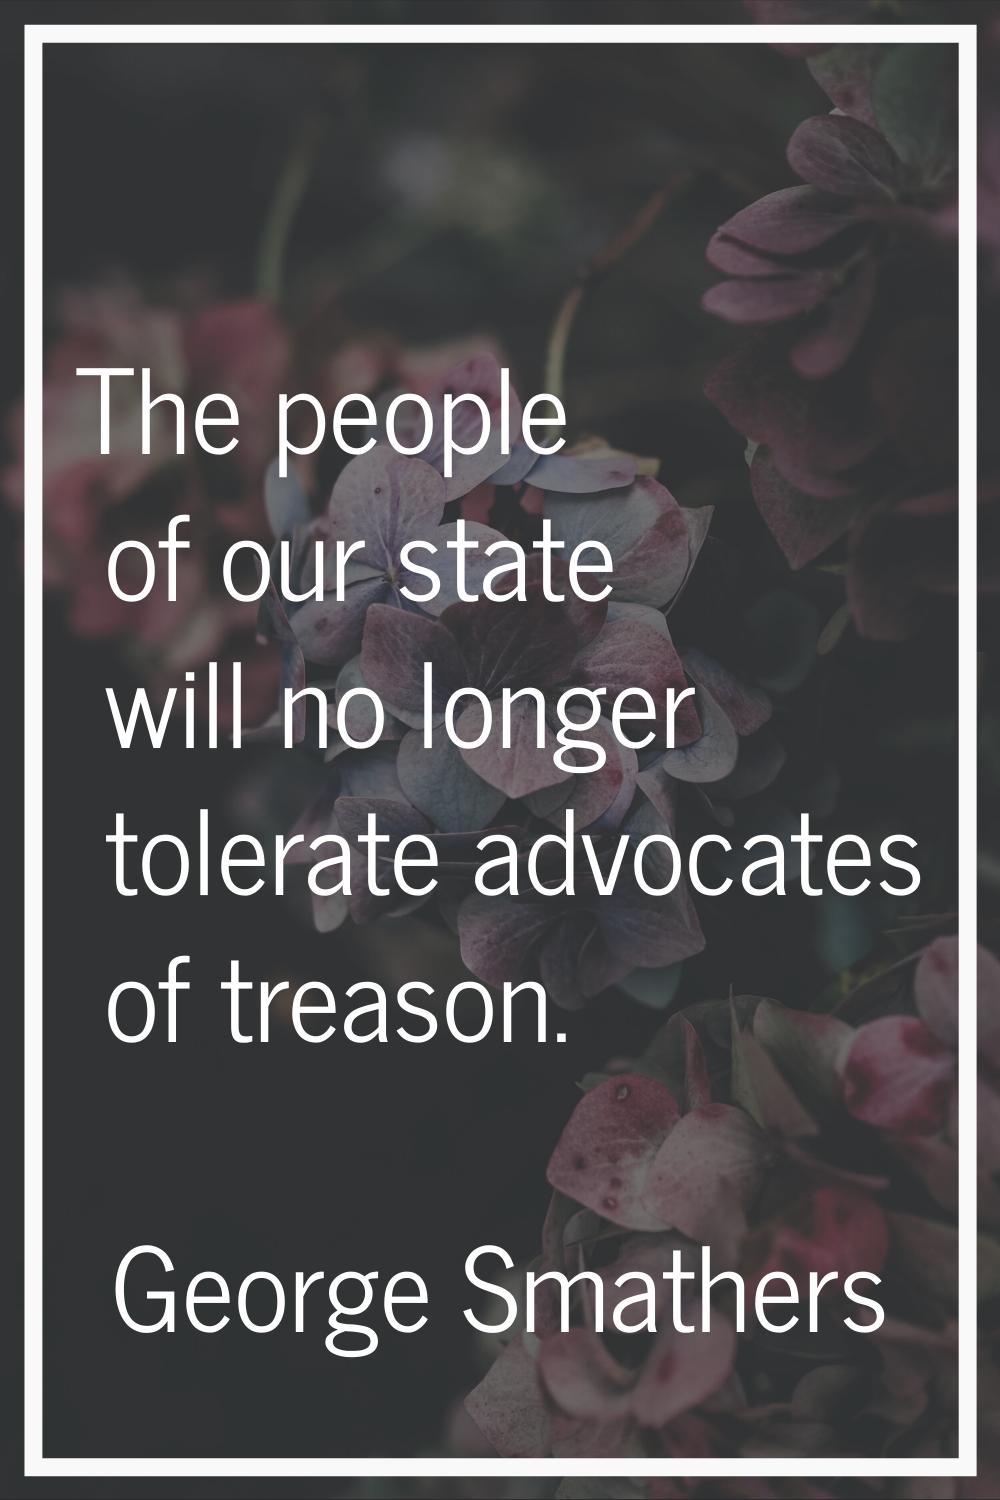 The people of our state will no longer tolerate advocates of treason.